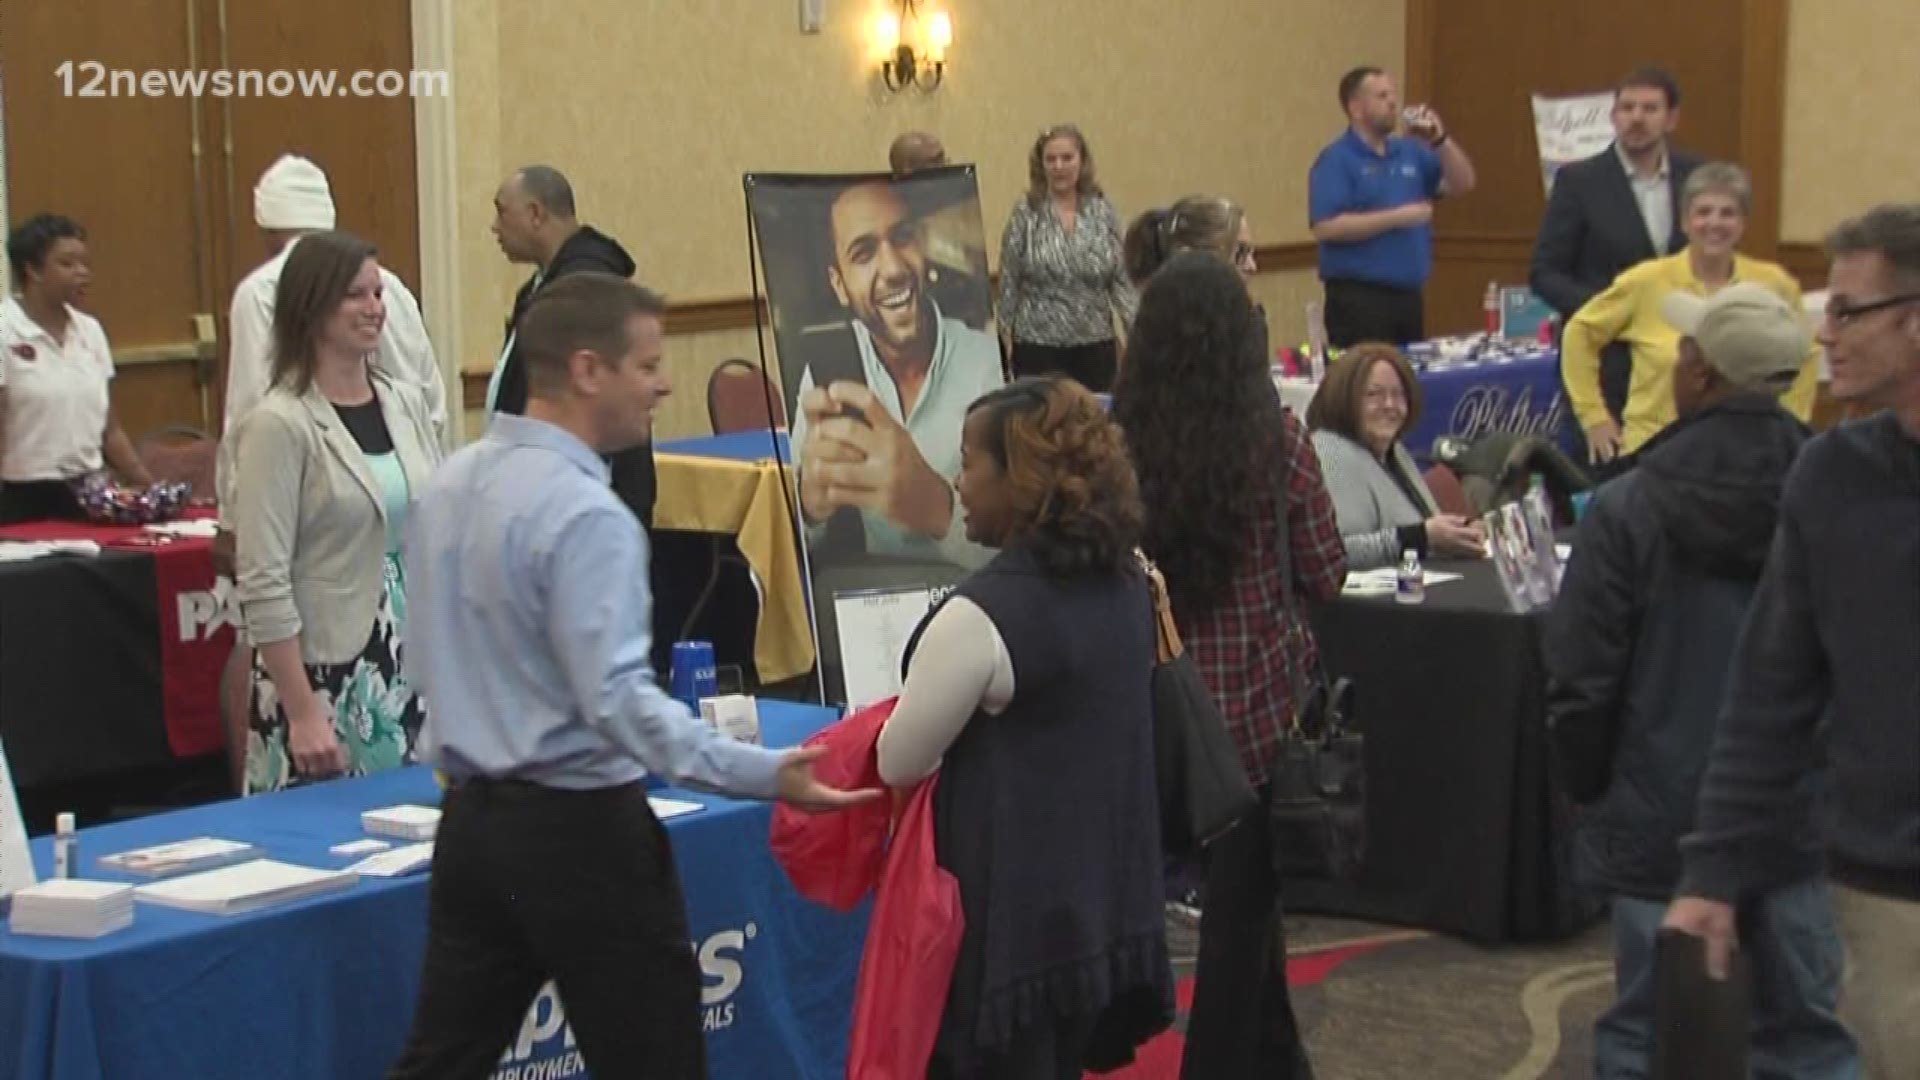 800 plus job seekers attended 12news job fair Thursday in Beaumont